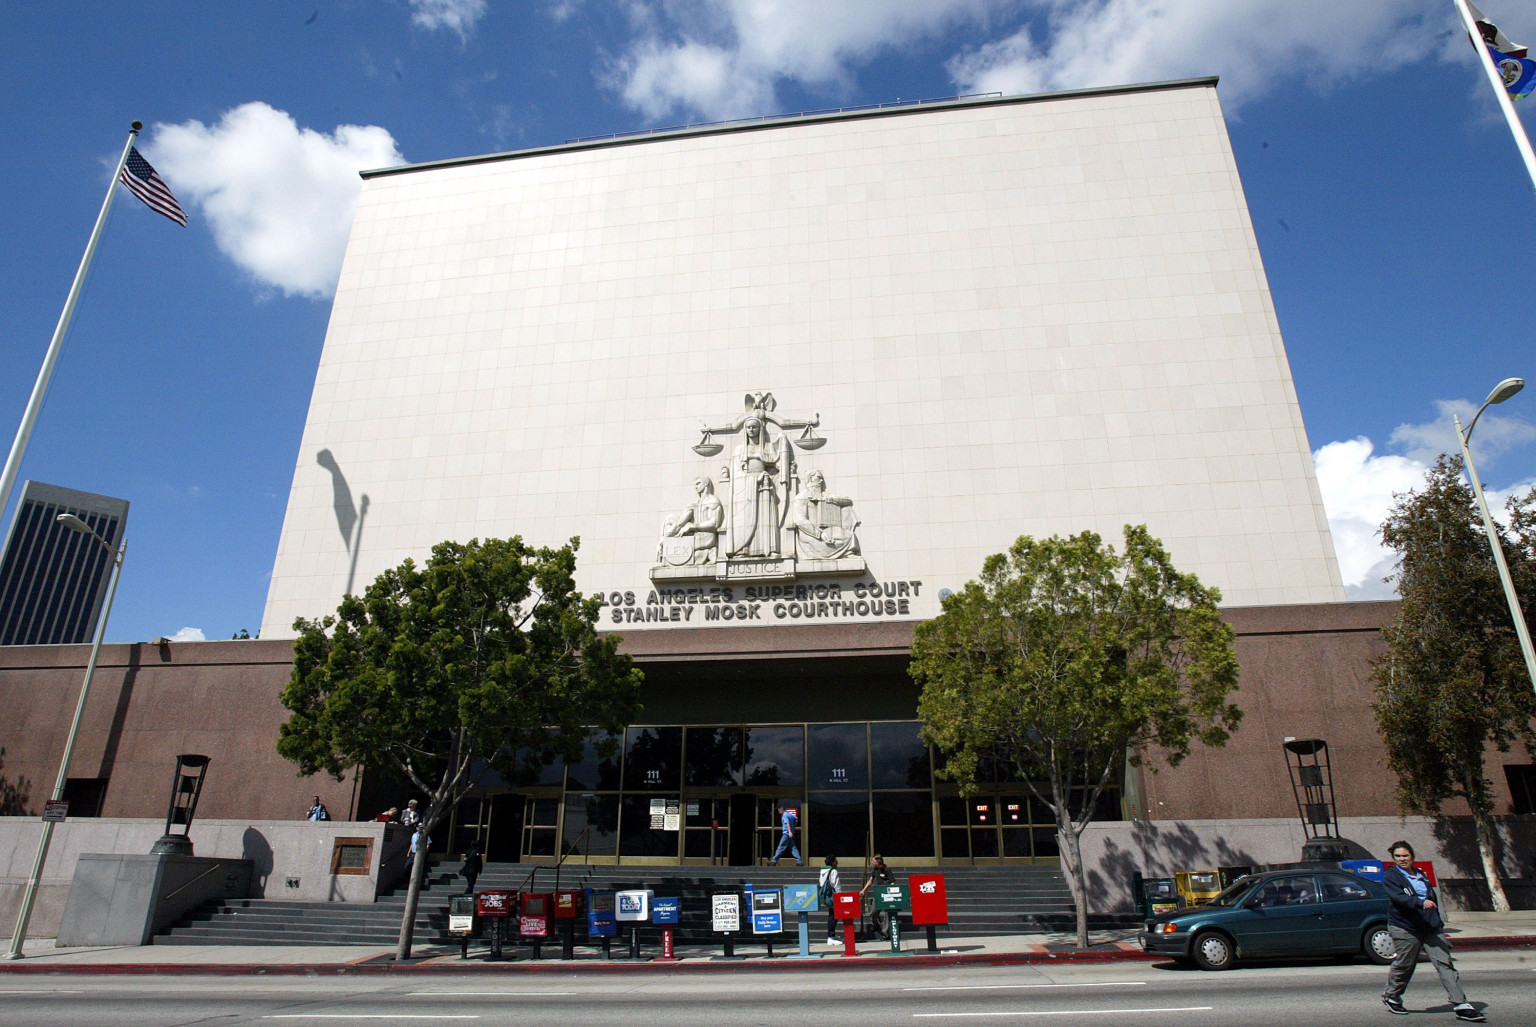 SUPERIOR COURT OF LOS ANGELES COUNTY TO RE-OPEN TODAY FOR ESSENTIAL AND